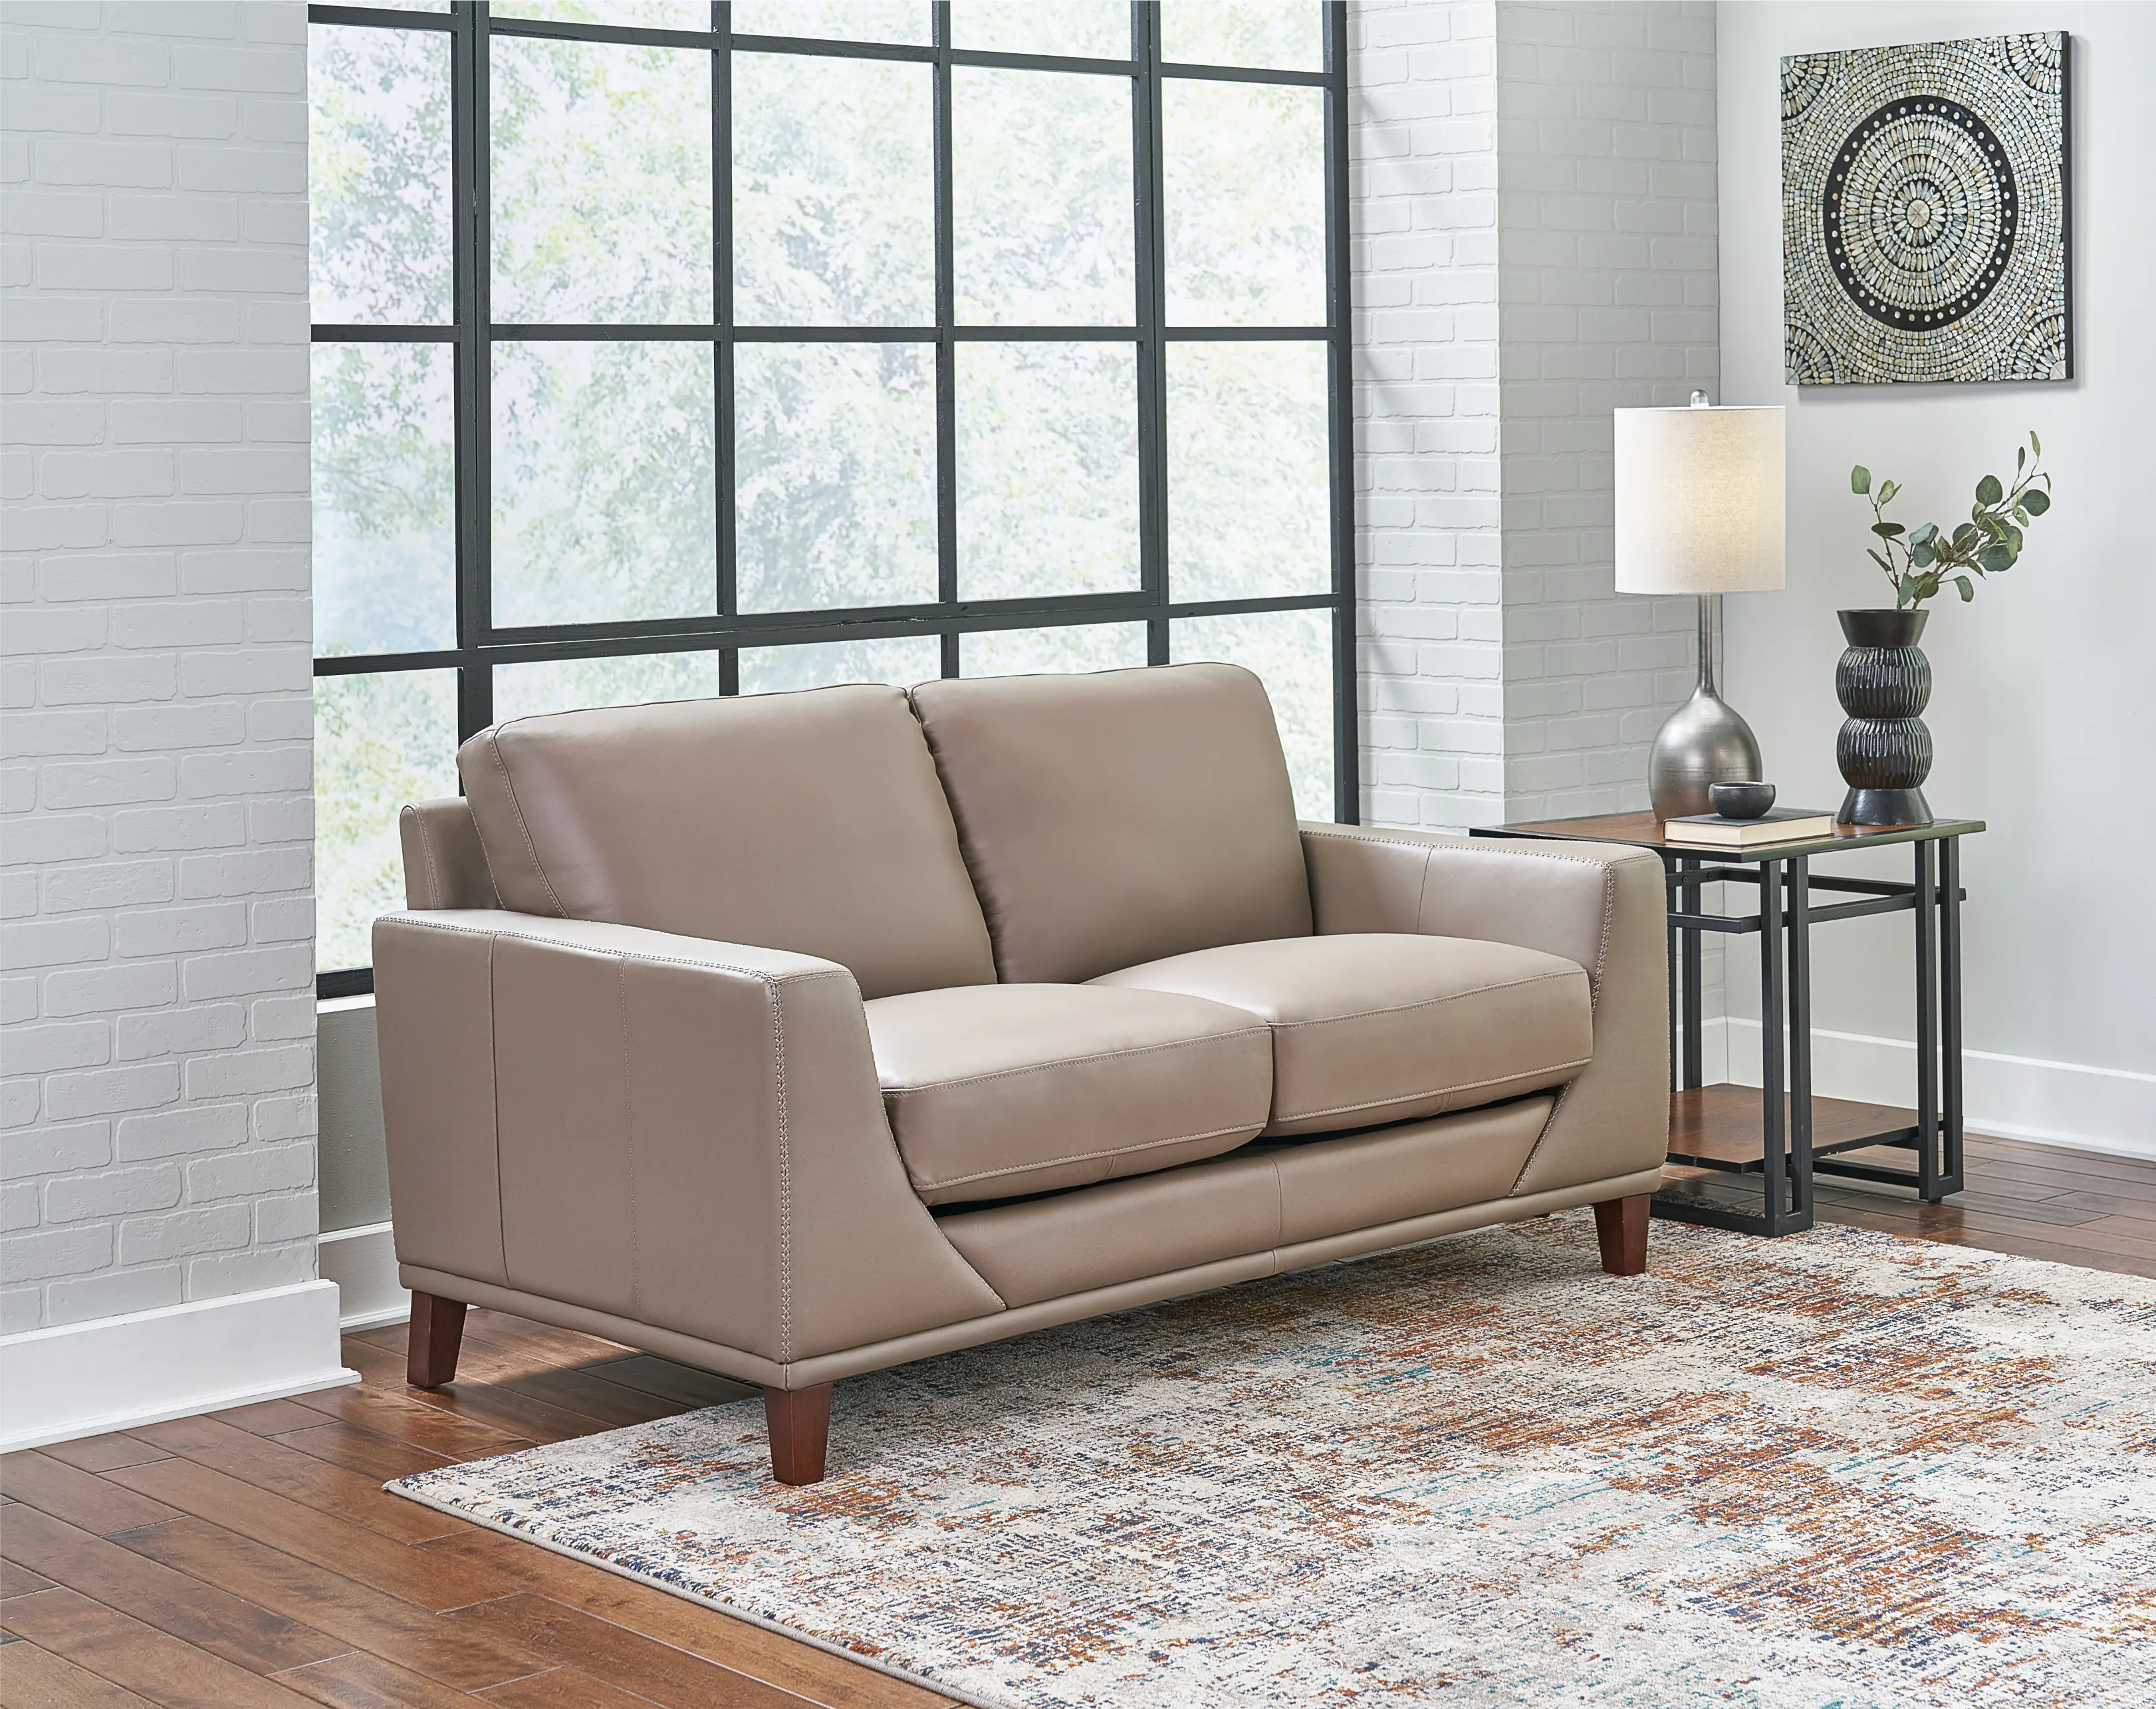 Sonoma Taupe Leather Loveseat - Amax Leather